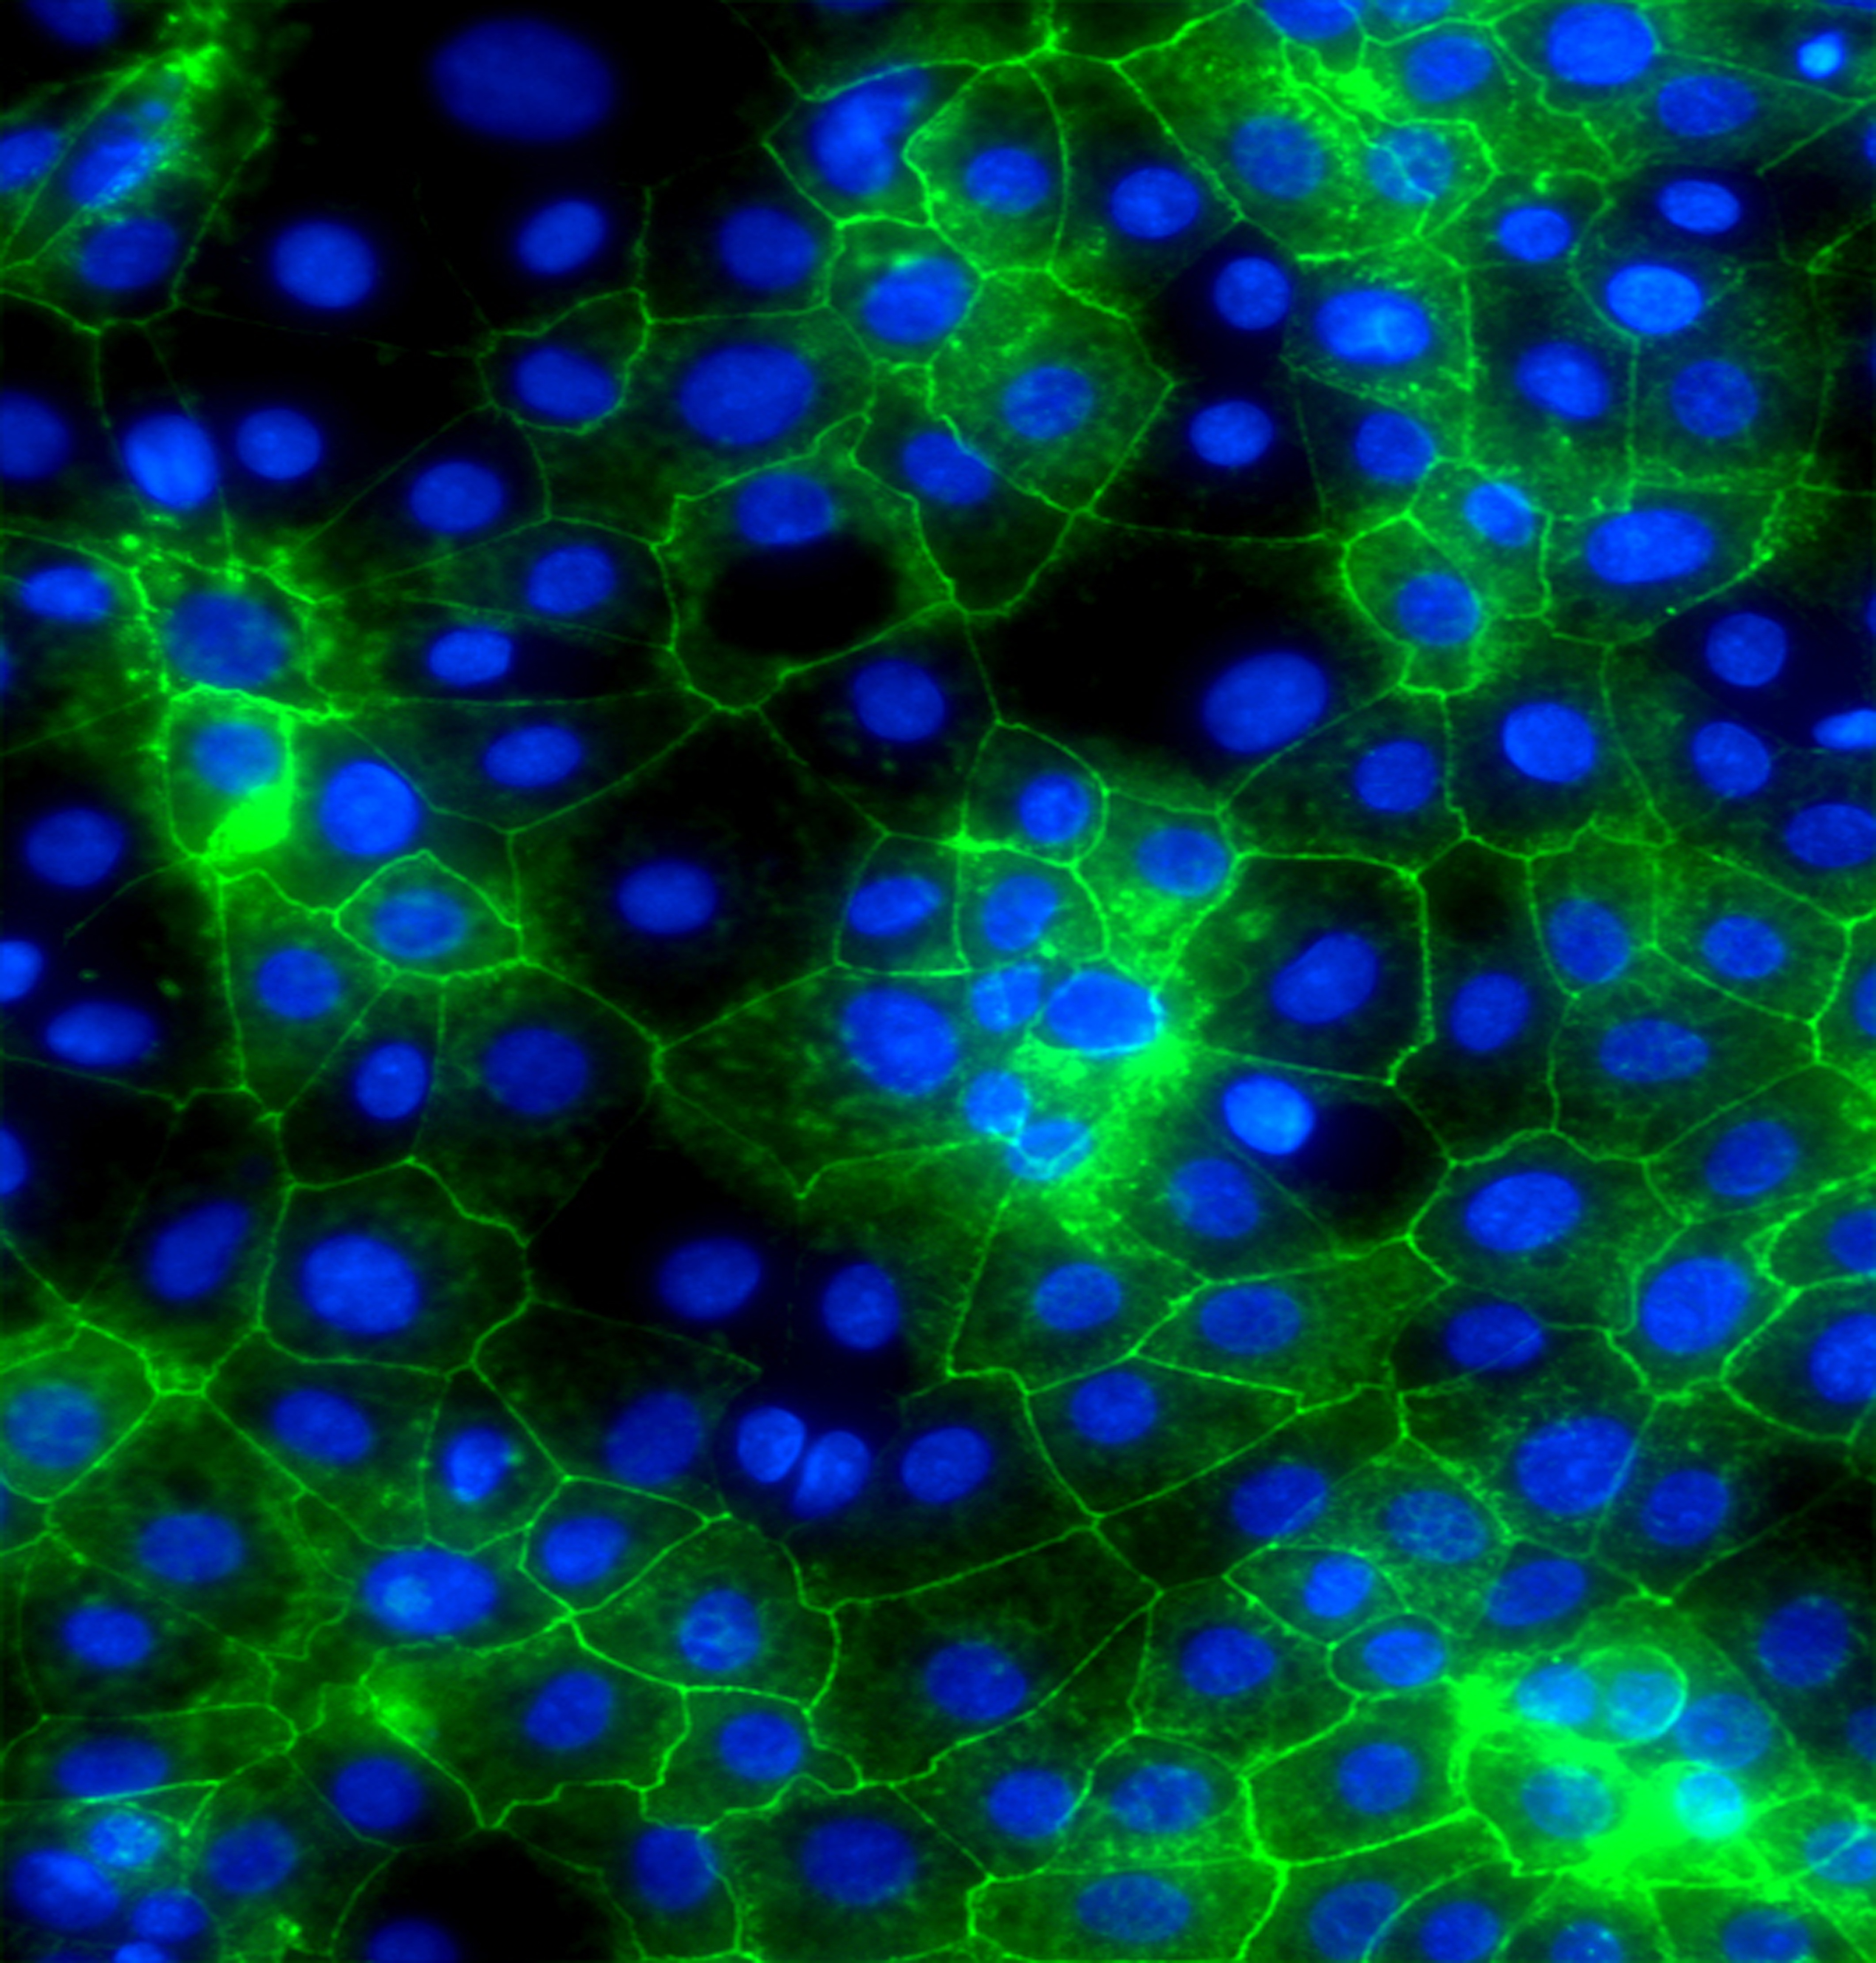 Stem cell derived hepatocyte like cells expressing E-Cadherin (green) and nuclei (blue)